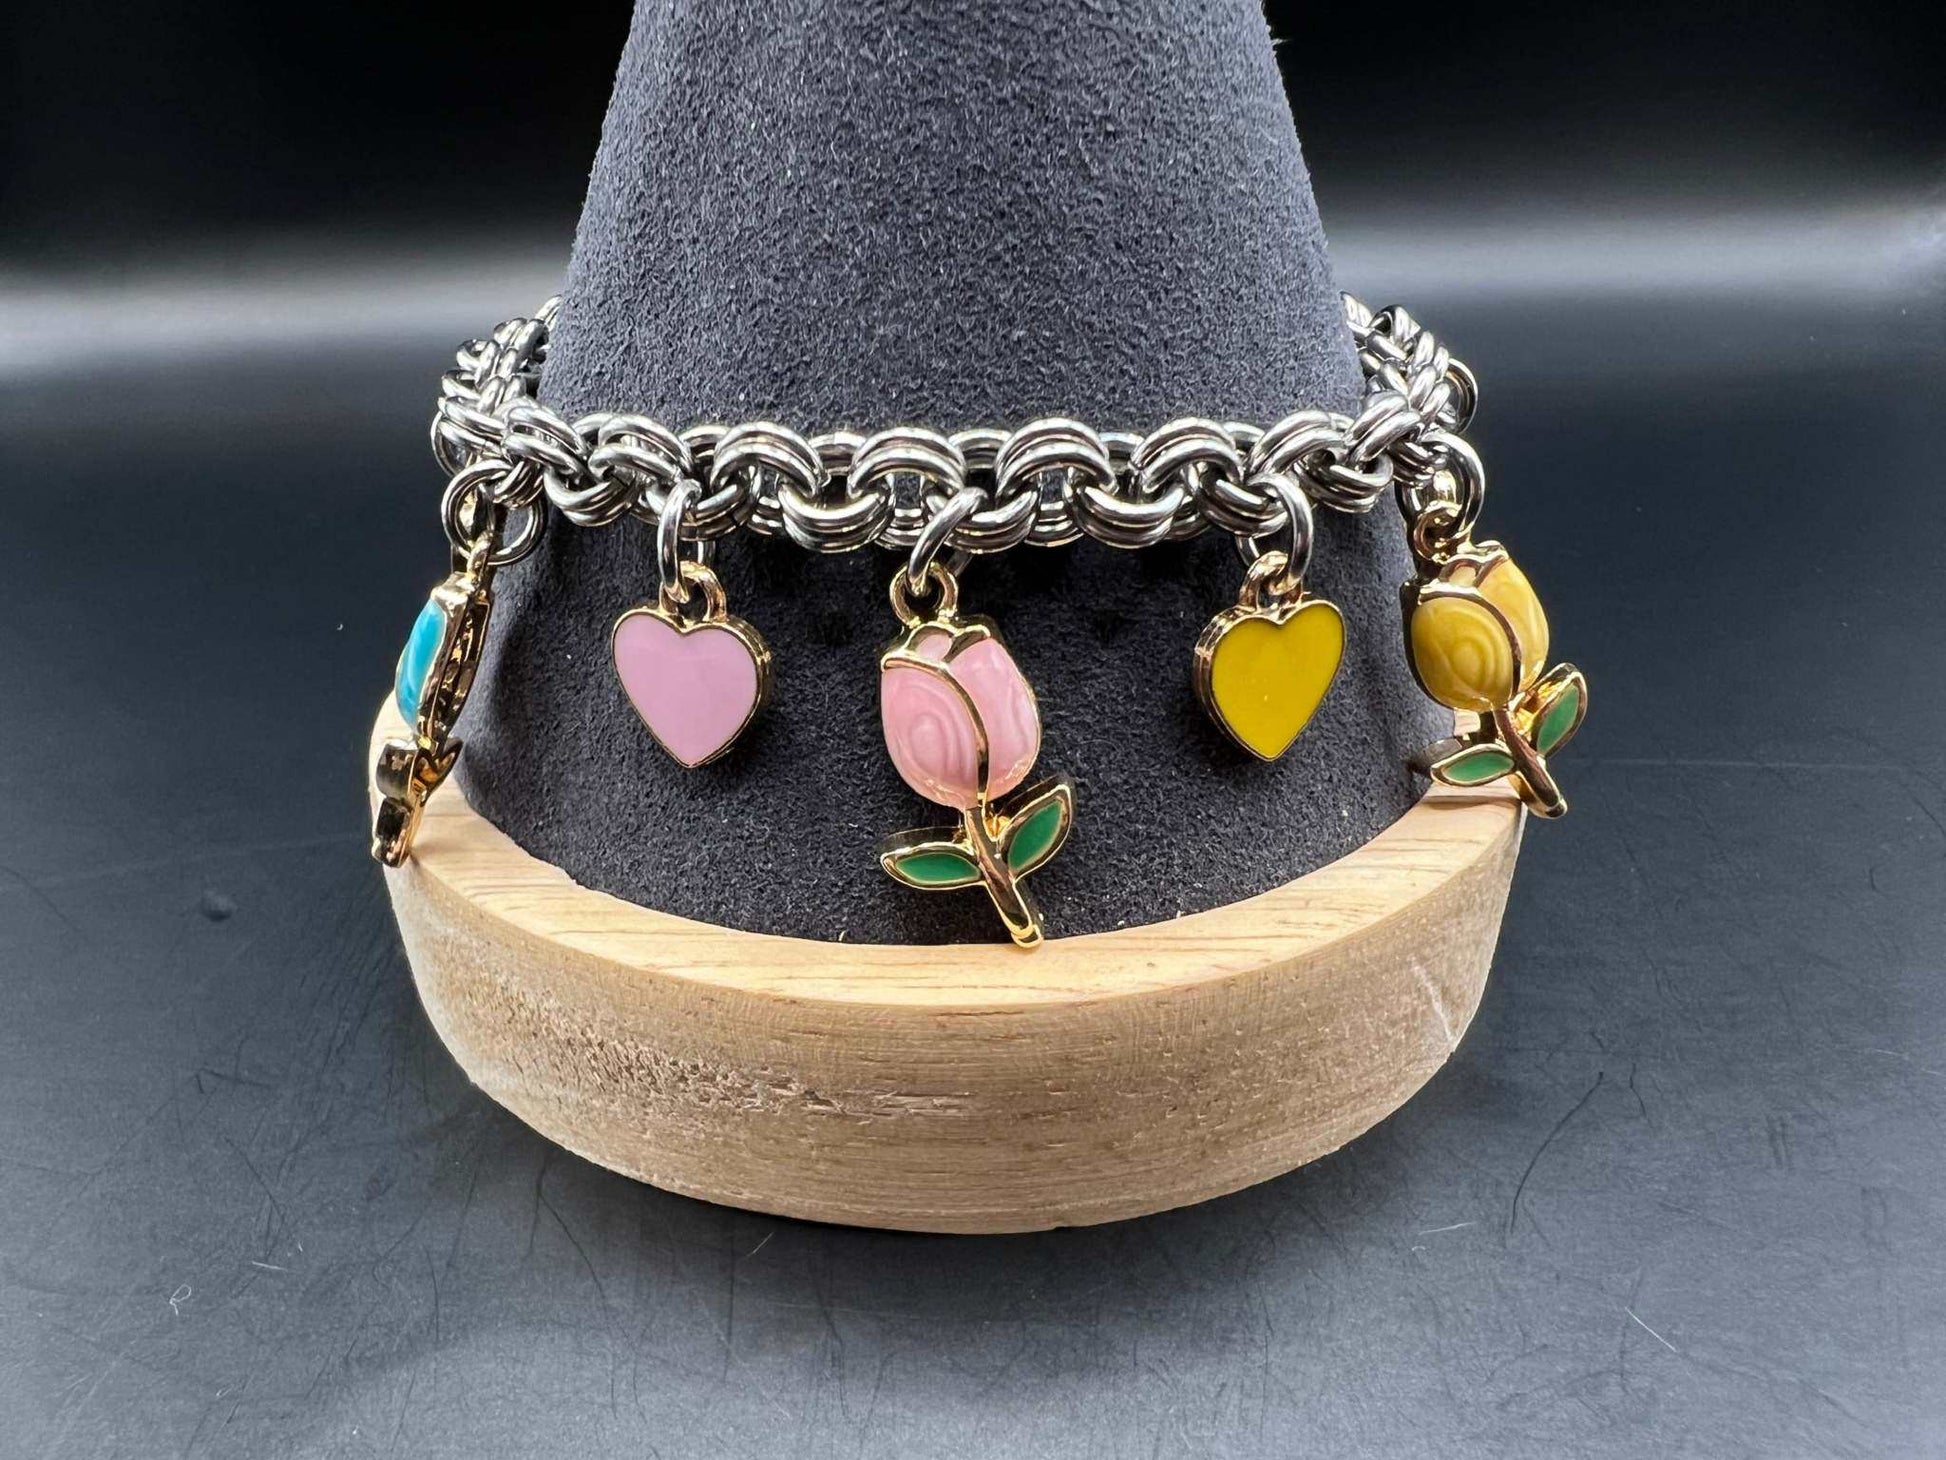 Charmed Spring: Charm Bracelet with Tulips & Hearts - Megan Gros Designs